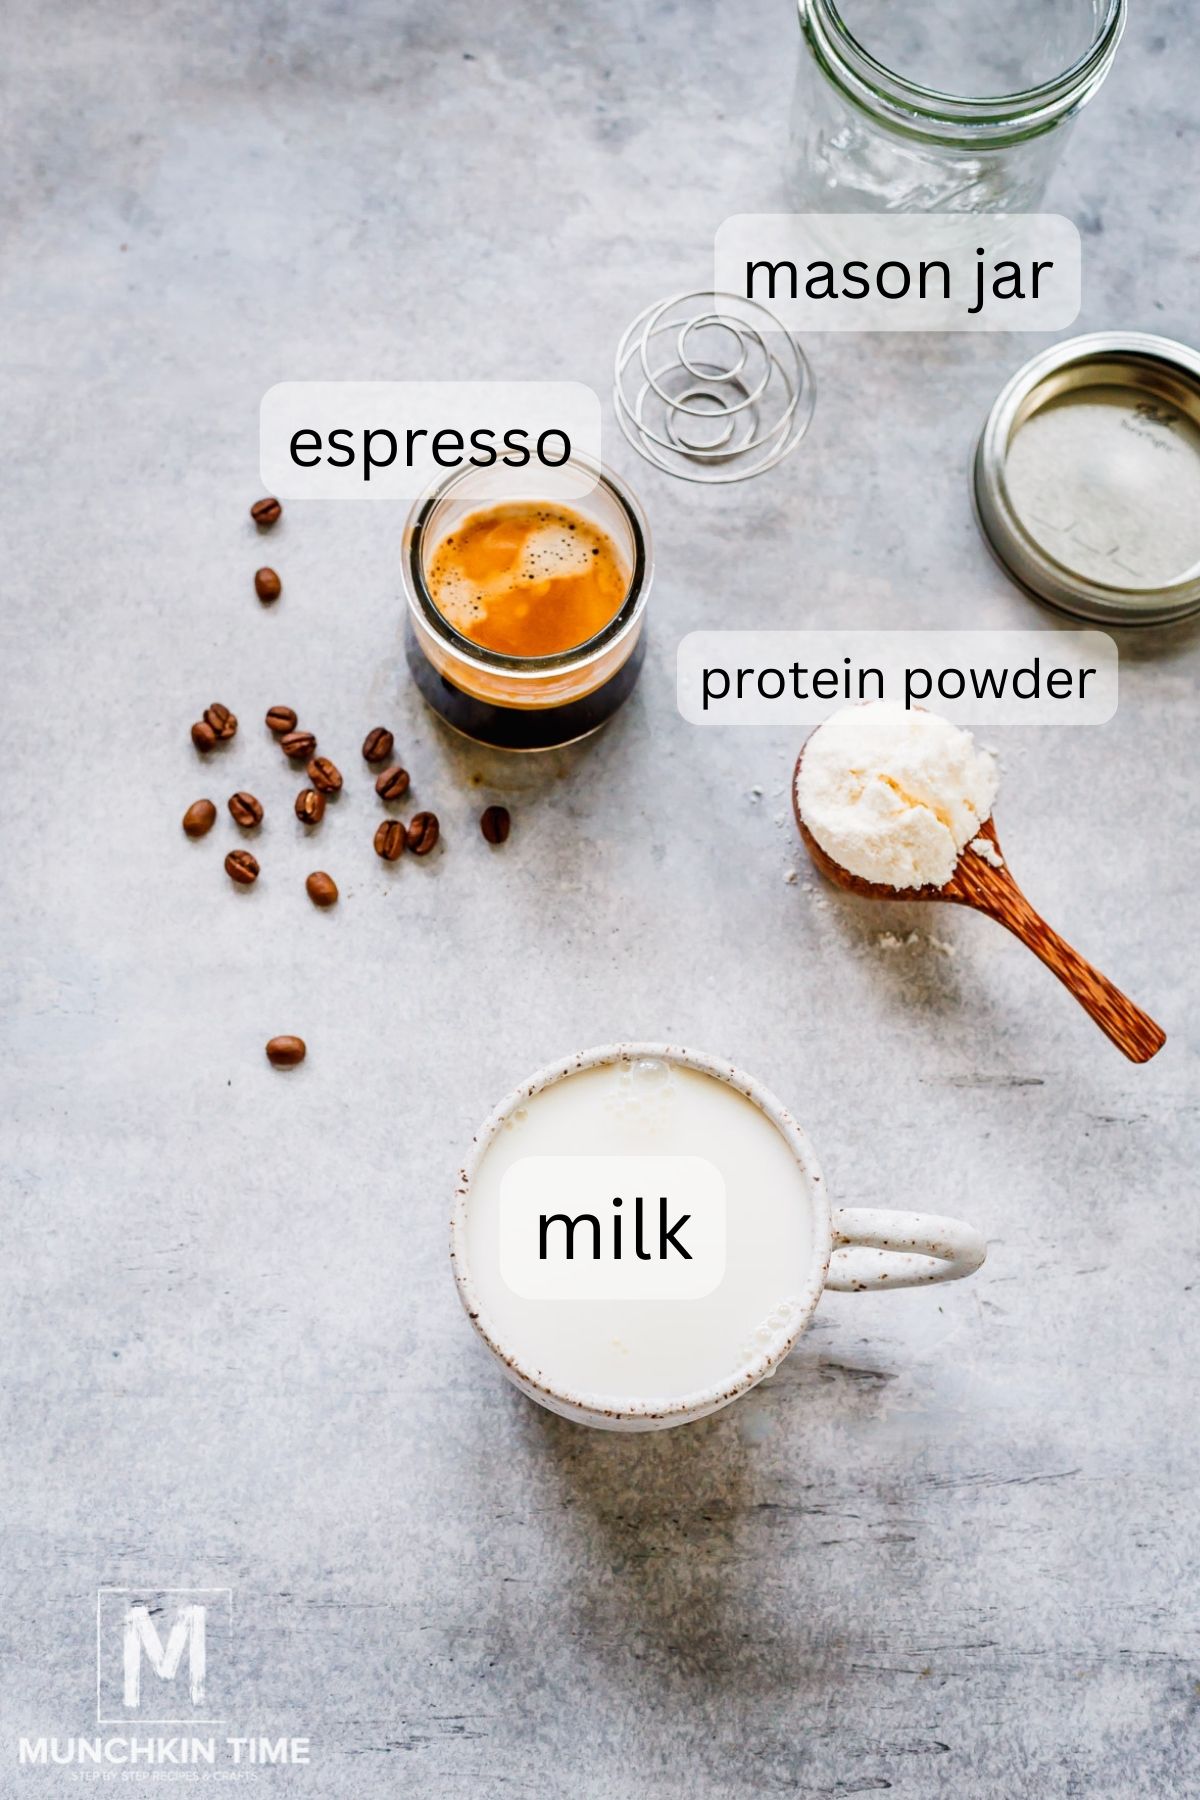 milk with 2 shots of espresso and protein powder on the table.